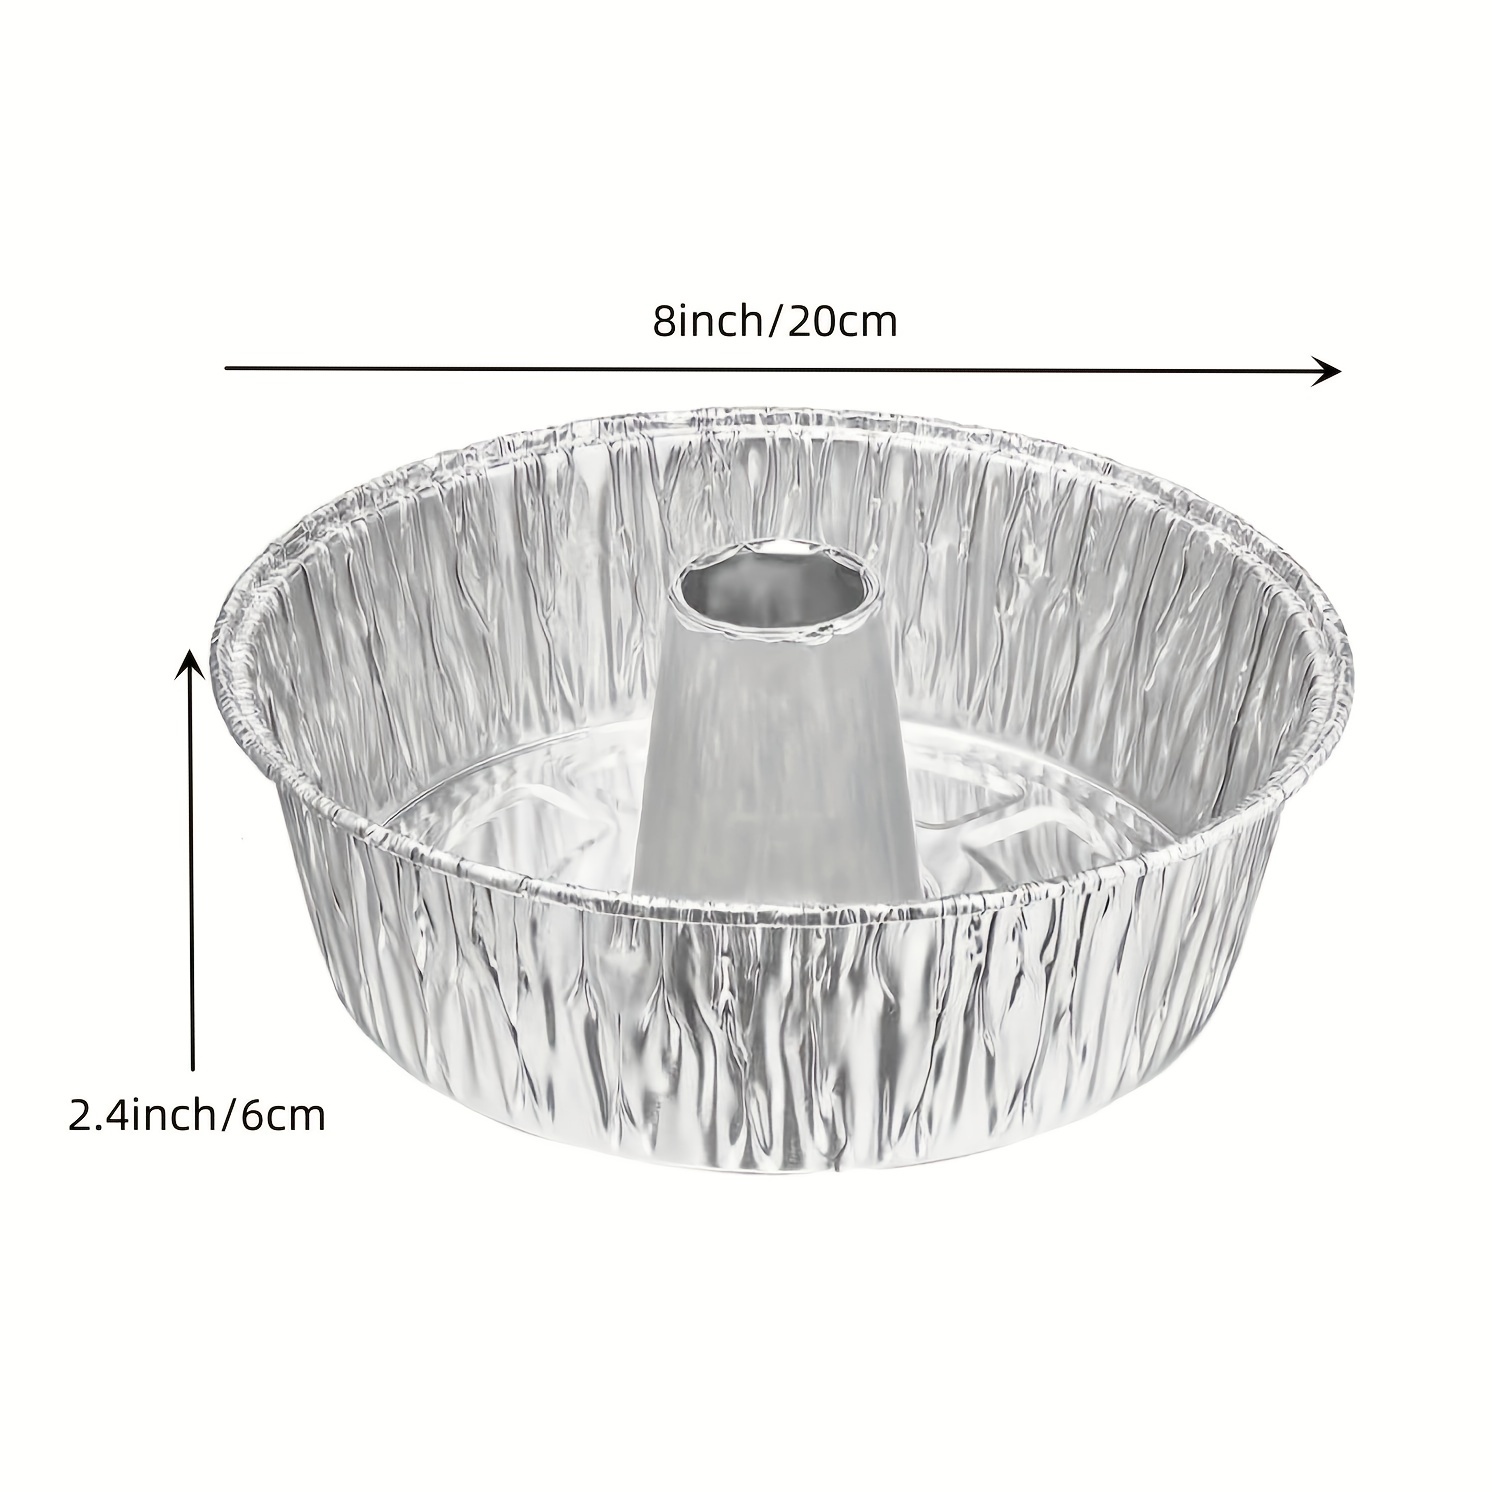 Non-Stick Angel Food Cake Pan 10 inch, Made of Heavy Duty Dark Grey  Aluminum for Home Kitchen